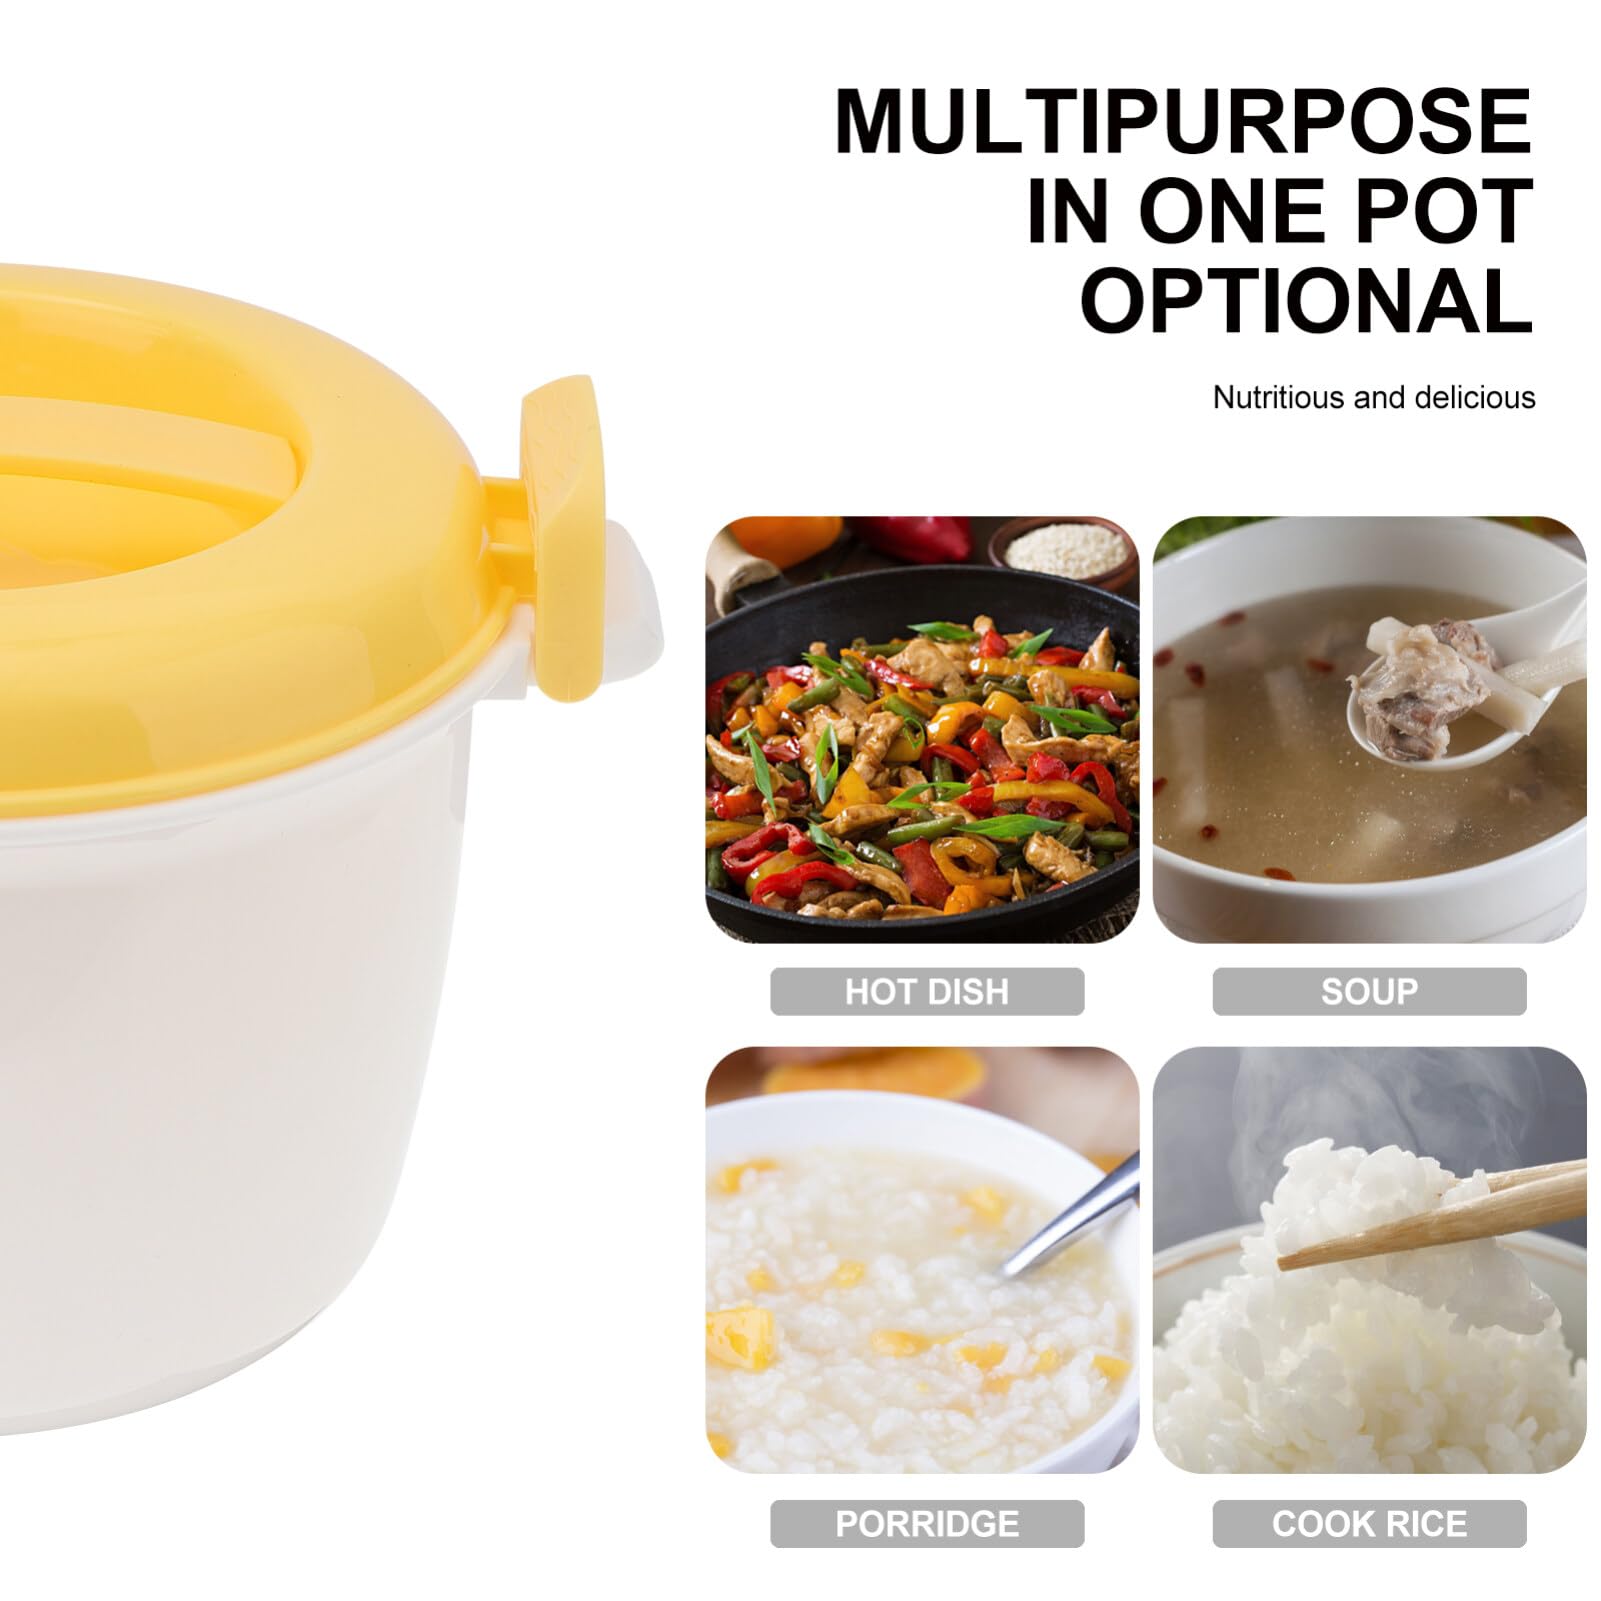 Microwave Rice Cooker, Microwave Steamer Bowl Pasta Cooker Noodle Fish Vegetable Veggie Steaming Bowl for Soup Rice Chicken 20x15.5cm (Random Color)